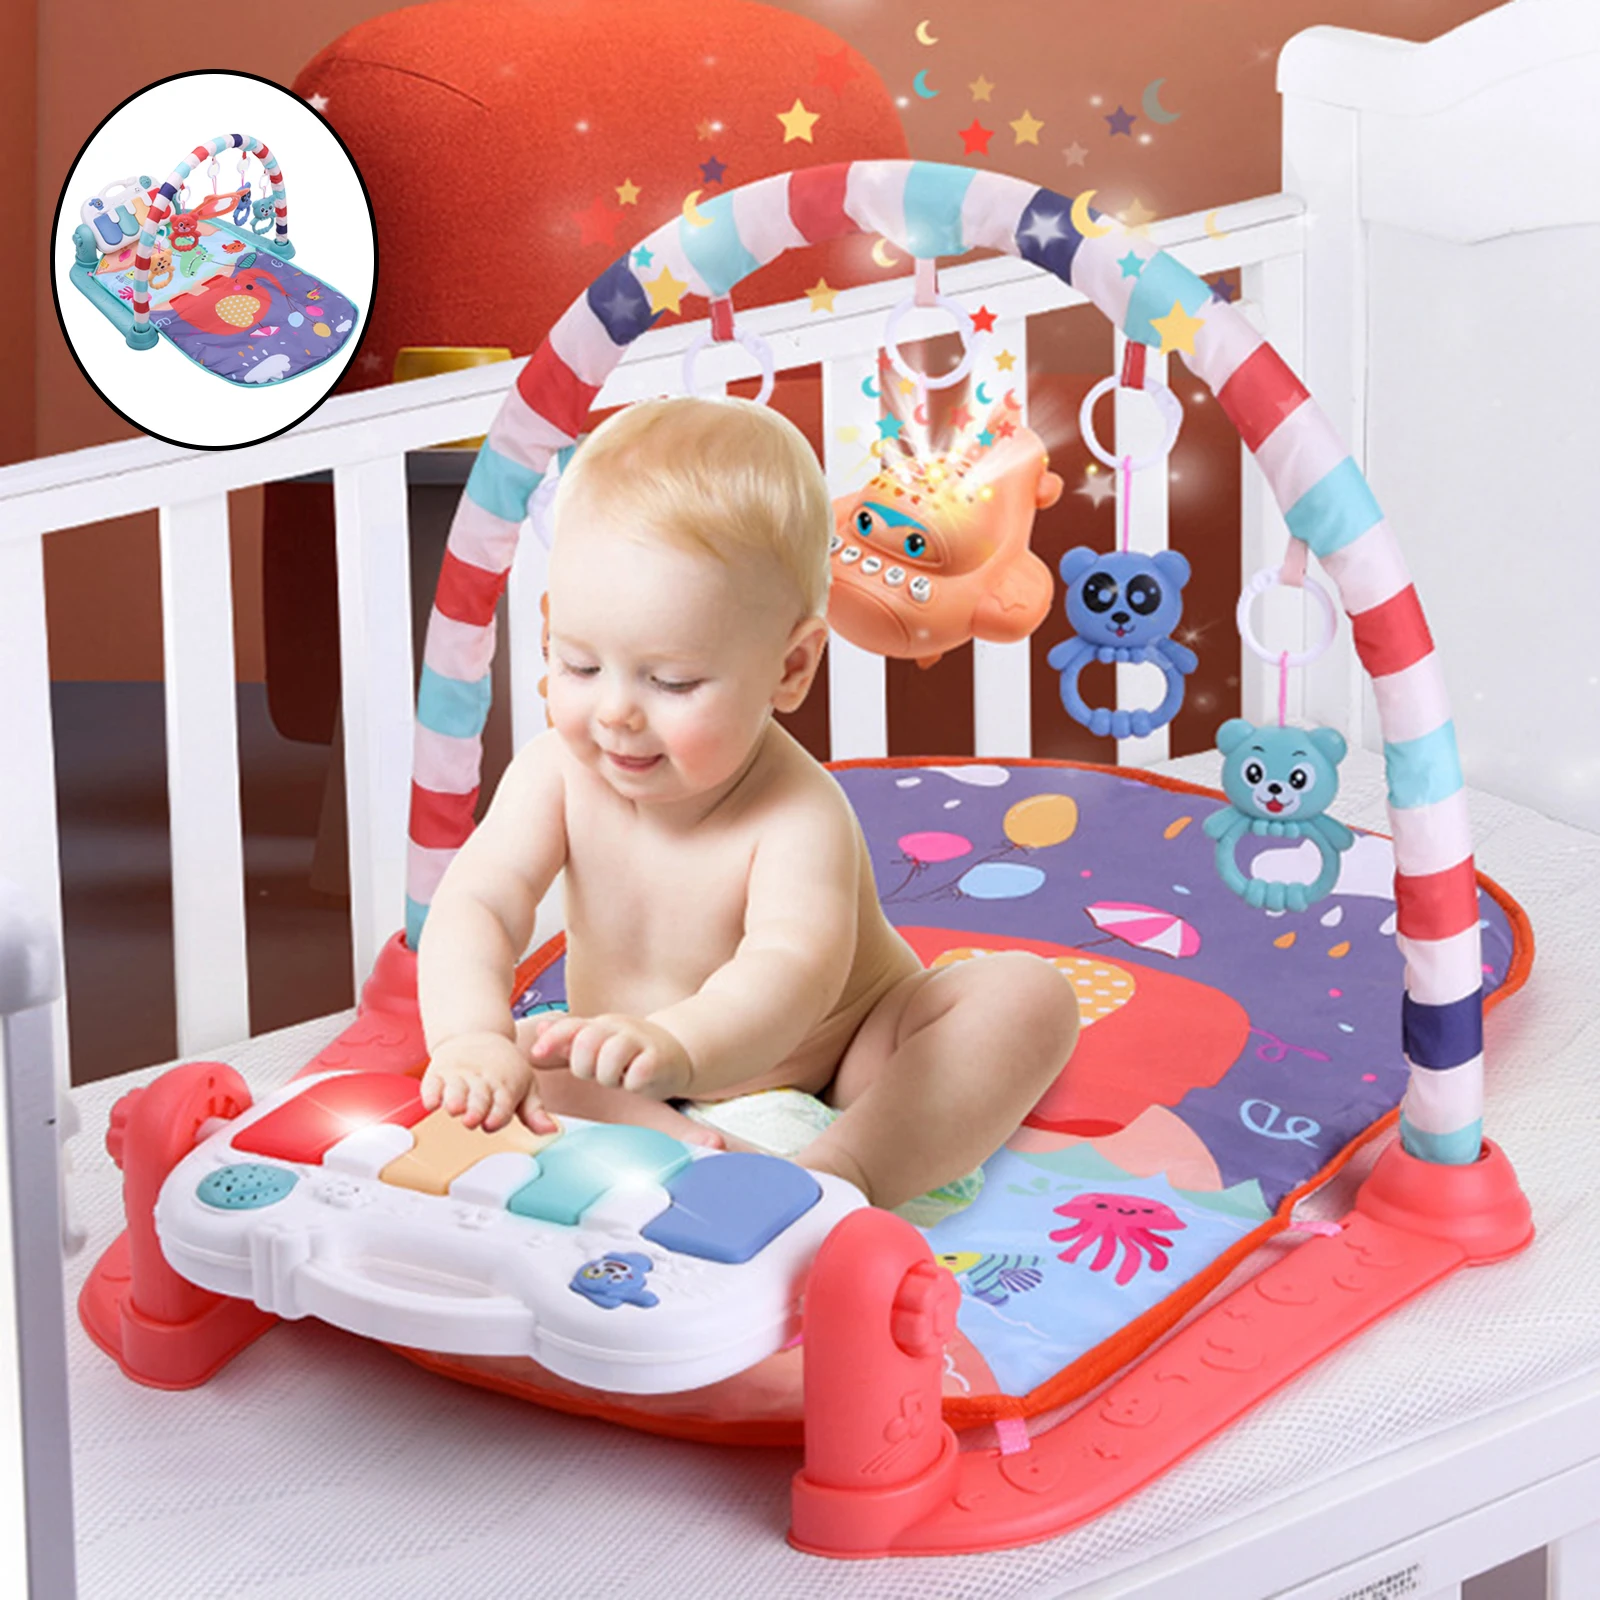 Baby Gym Play Mat with Sound and Music Activity Rug Toys Music Play Mat Activity Gym for Newborns Toddlers